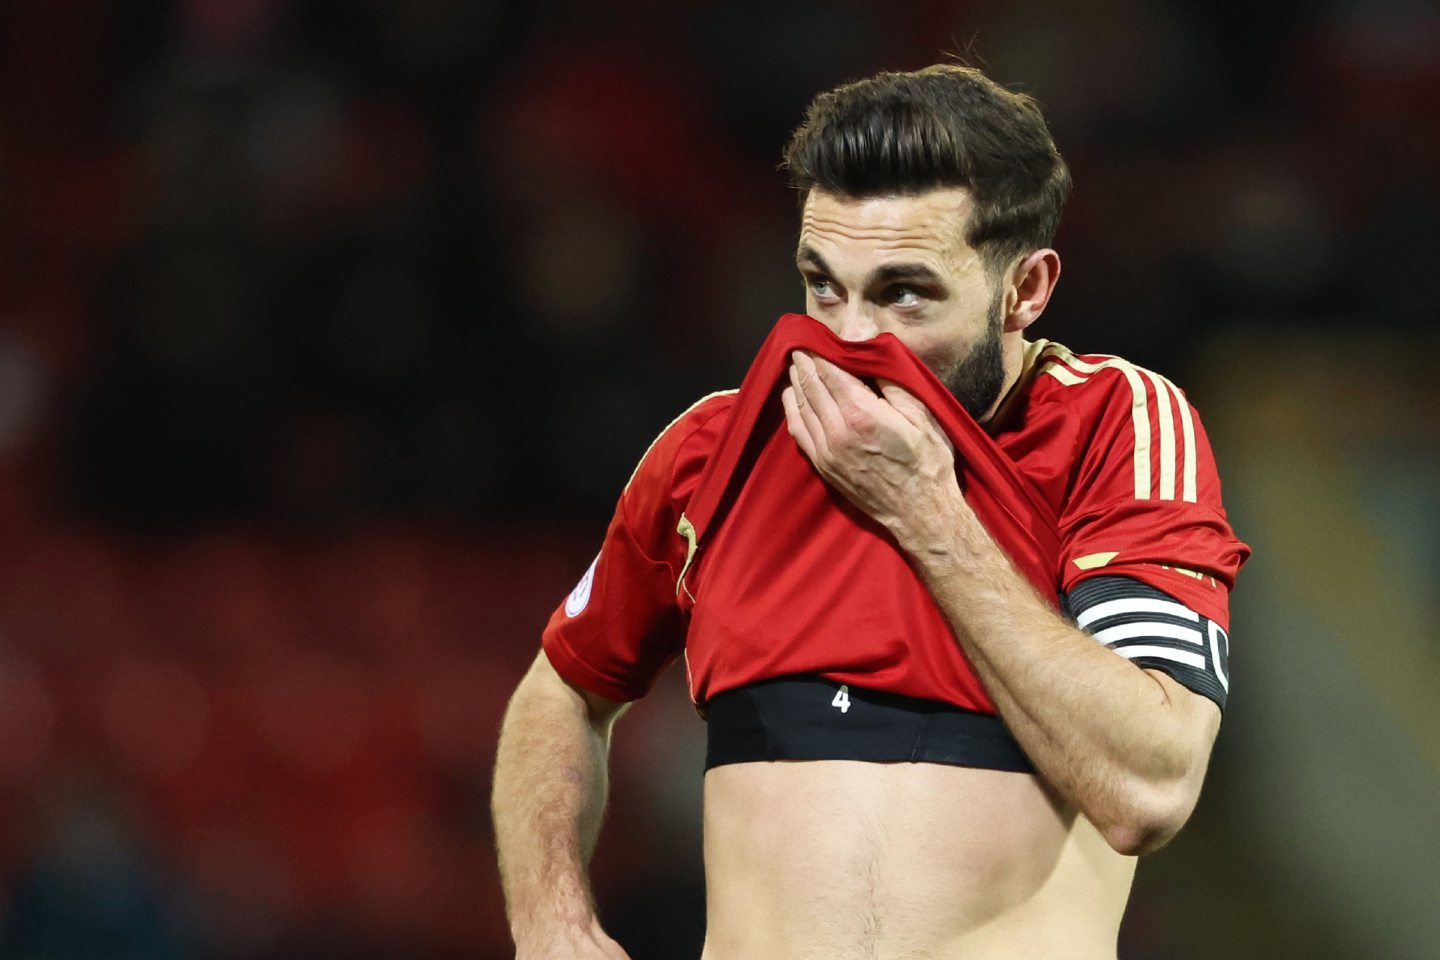 Aberdeen's Graeme Shinnie looks dejected during the 1-0 loss to Kilmarnock. Image: SNS